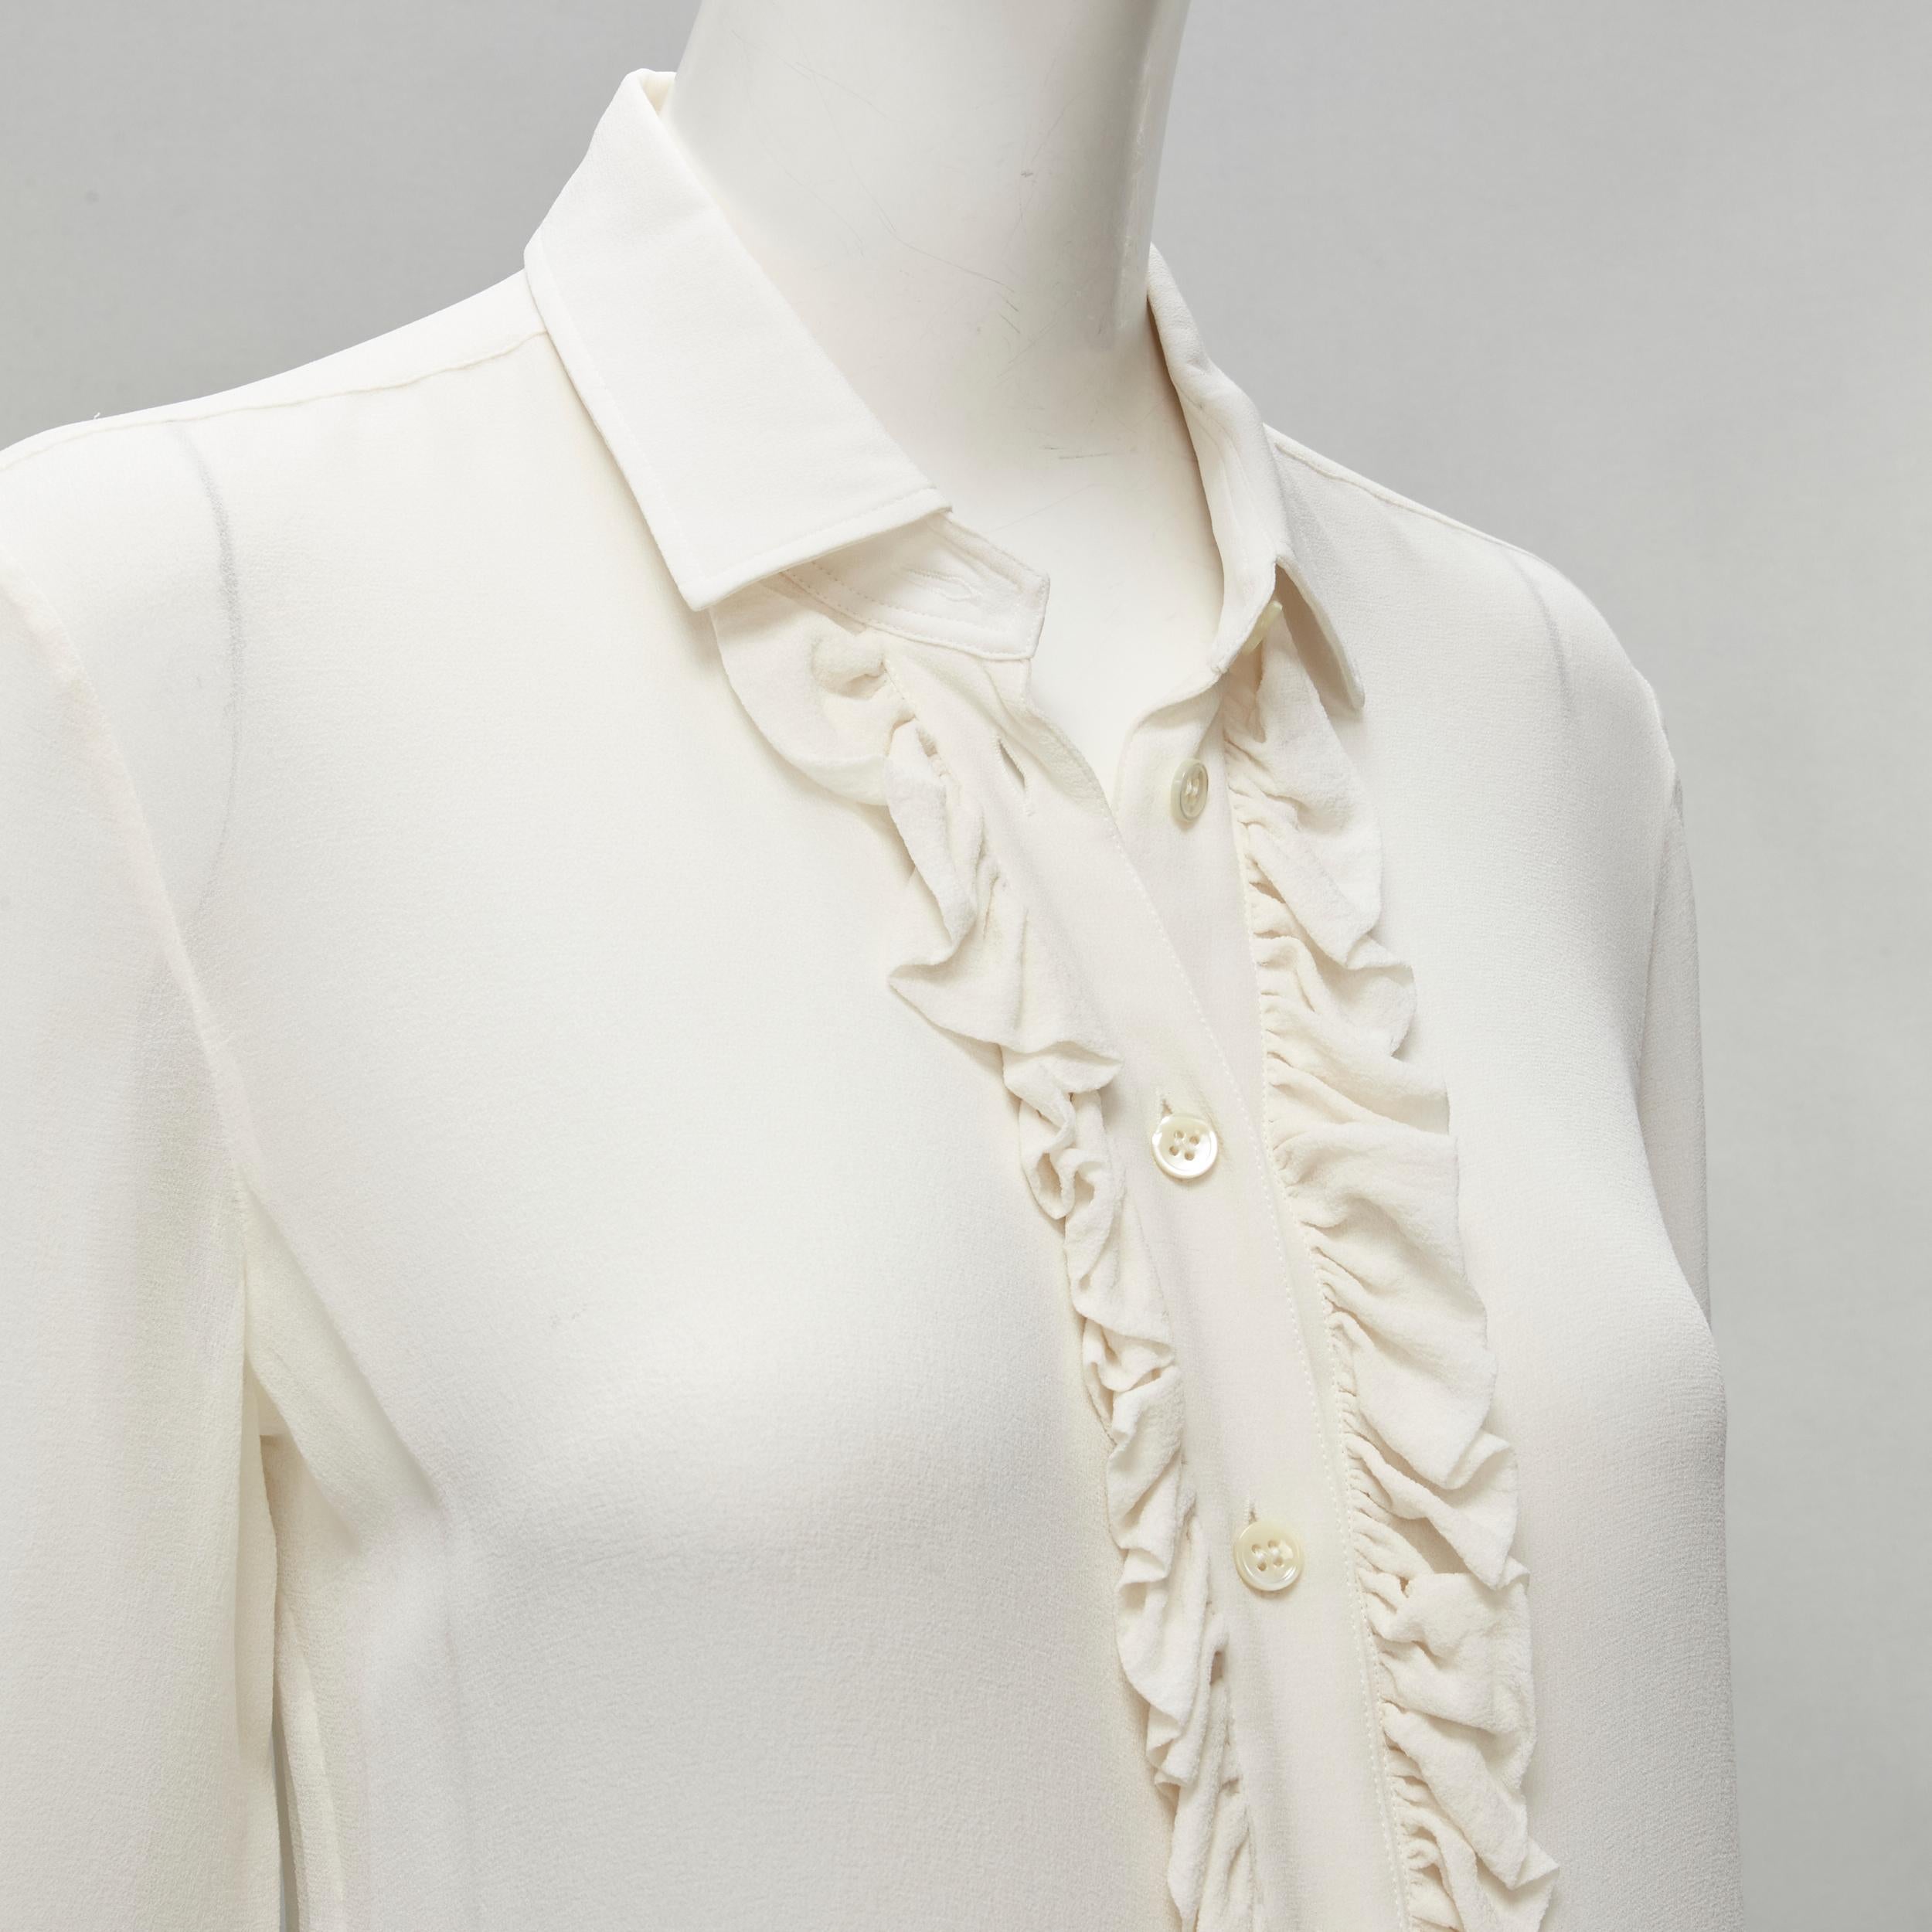 SAINT LAURENT cream silk ruffle placket button down shirt blouse S
Reference: JACG/A00088
Brand: Saint Laurent
Material: Feels like silk
Color: Cream
Pattern: Solid
Closure: Button
Extra Details: See through, might need to consider undergarment when